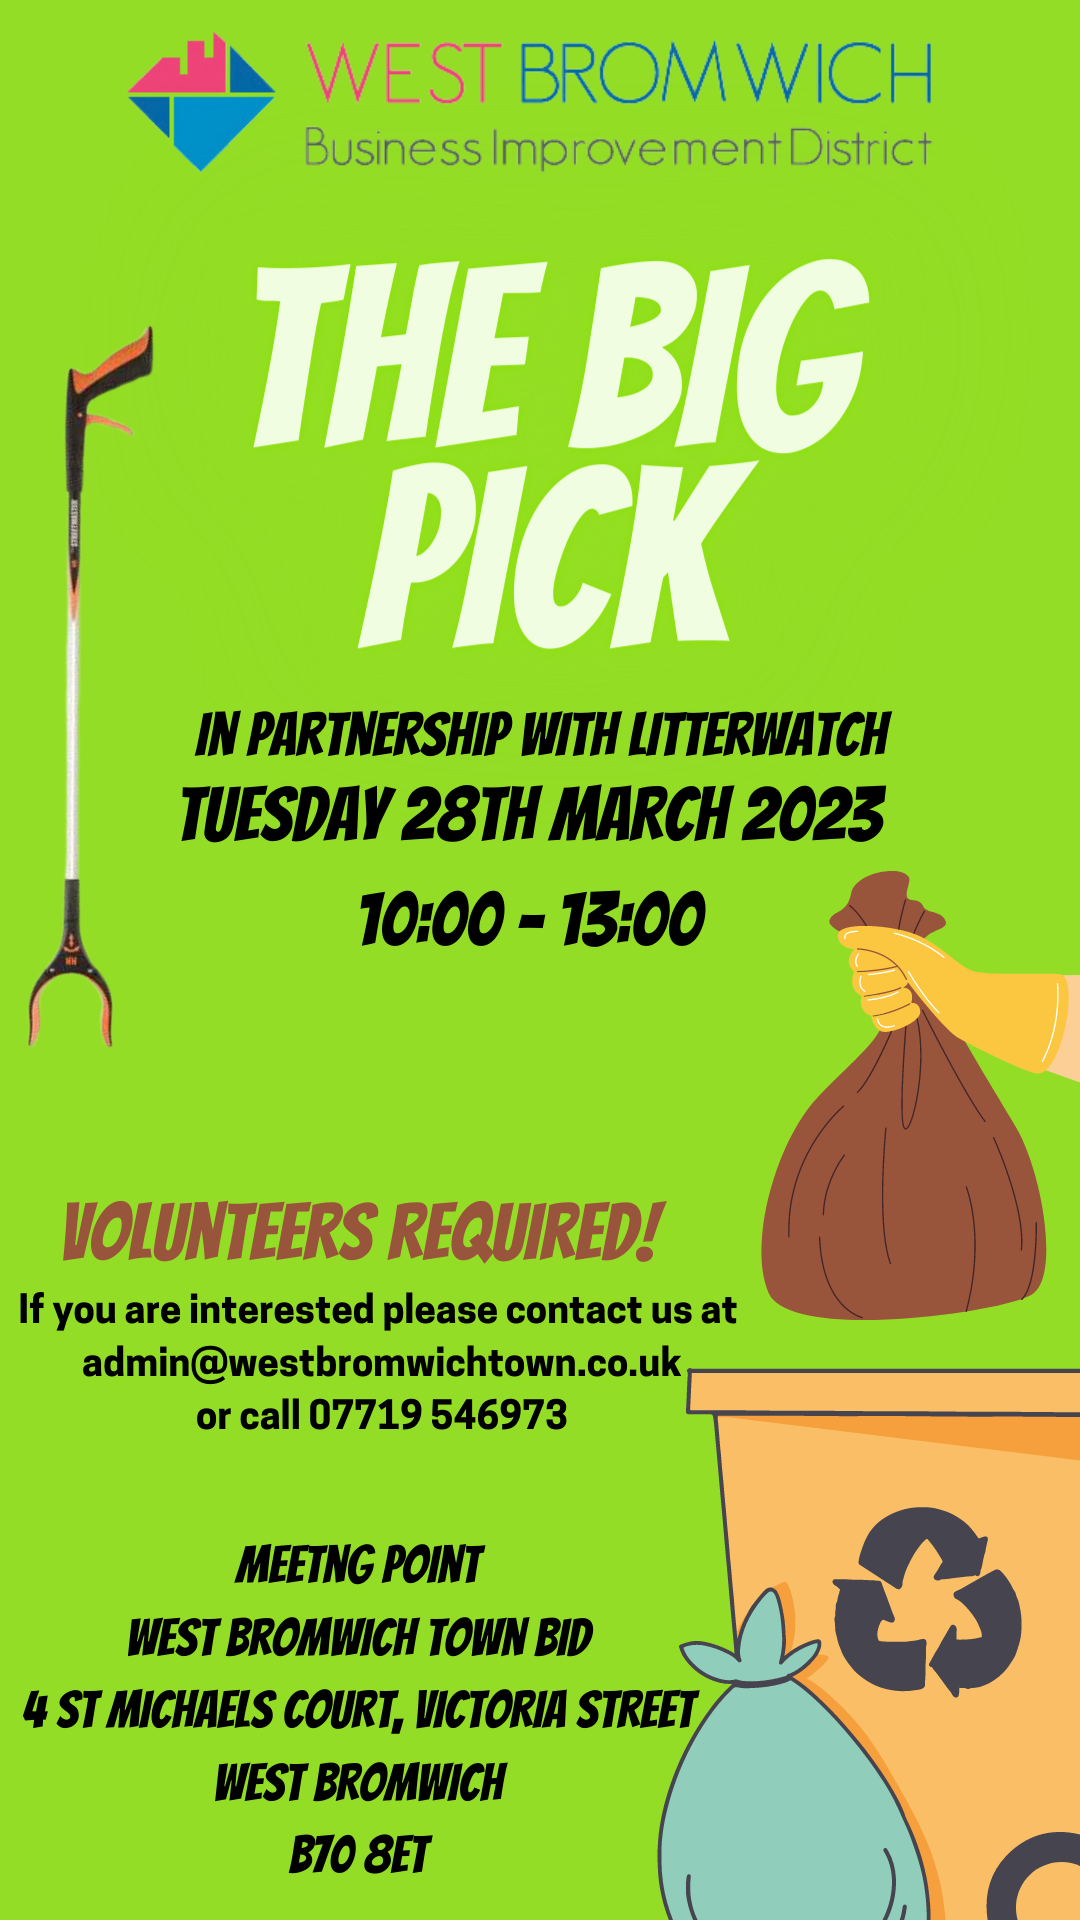 Litter Picking 28th March 2023